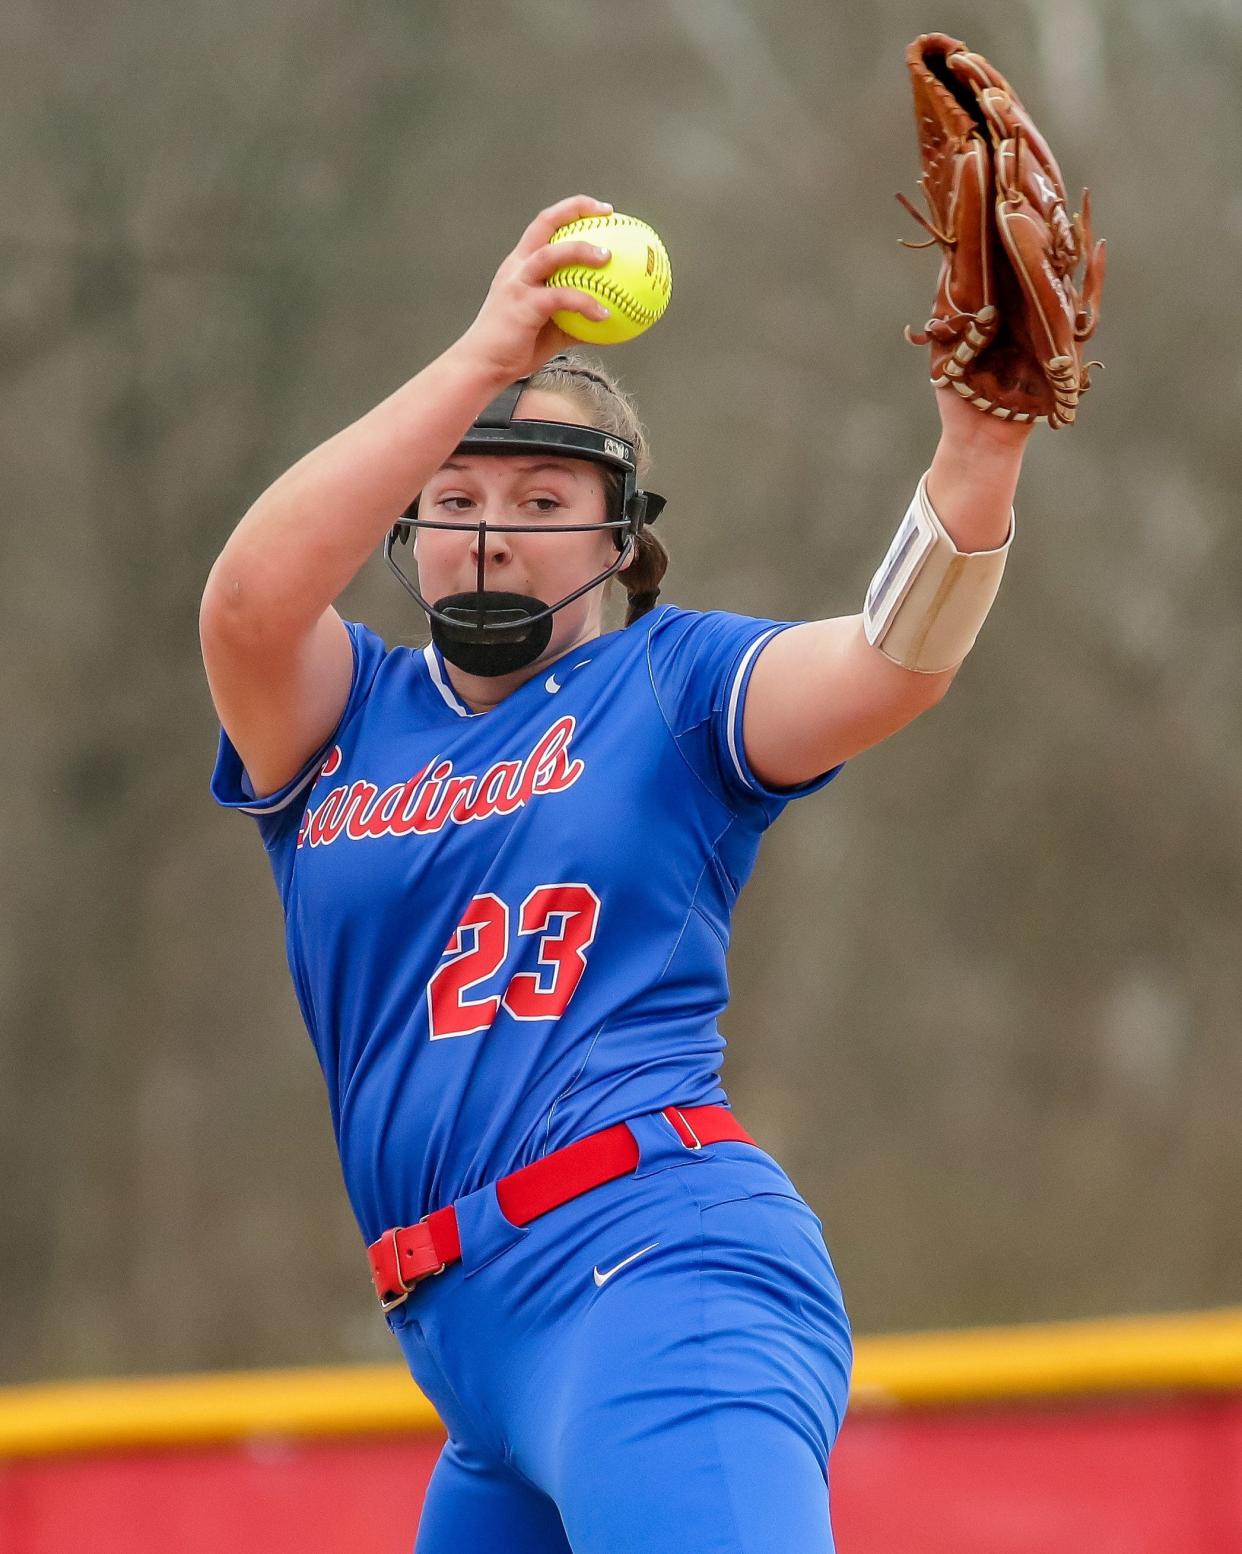 Junior Faith Yoho has returned to lead Thomas. Last season, she was second-team all-district and first-team all-league, hitting .444 with four home runs and 19 RBI and going 9-7 with a 2.93 ERA and 100 strikeouts in 121 2/3 innings.